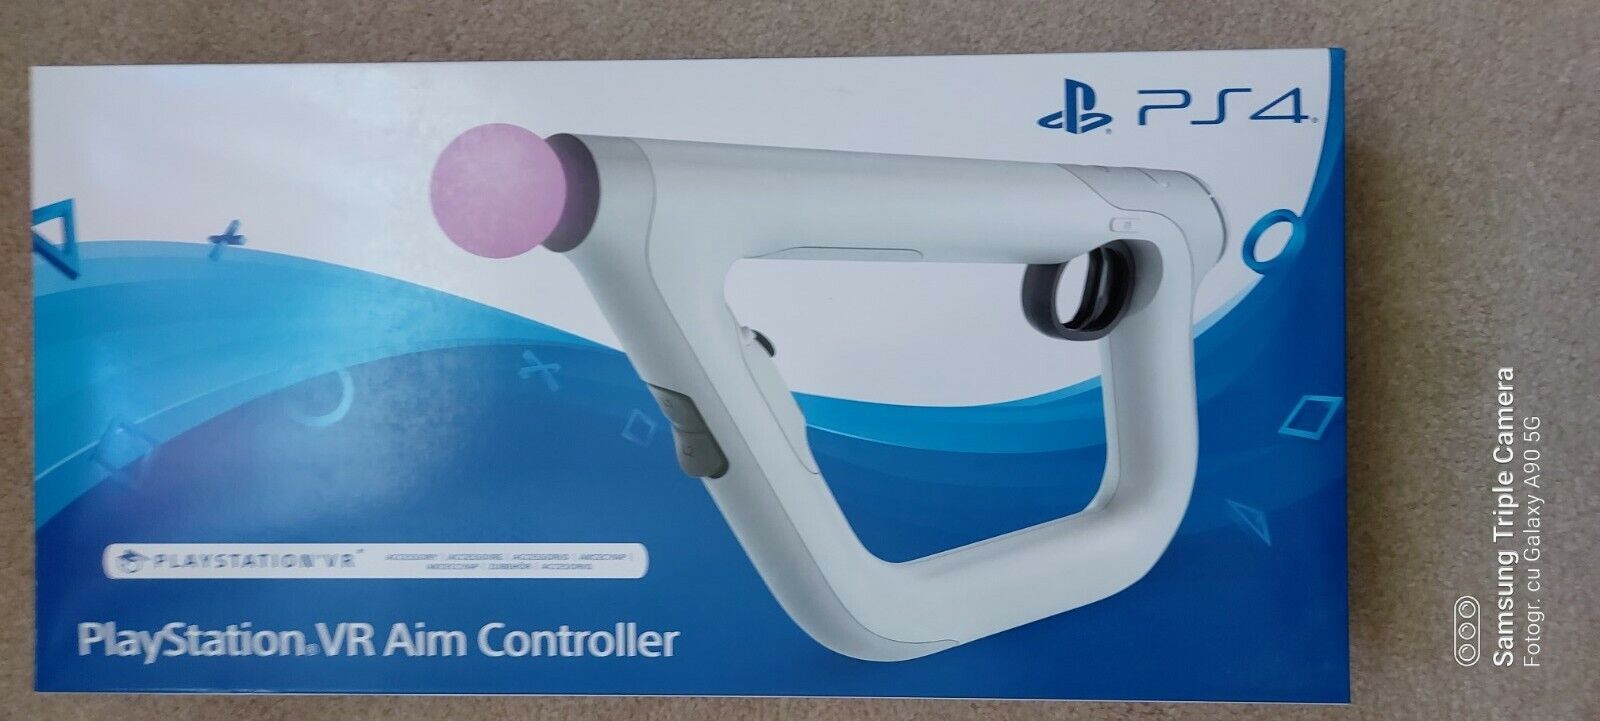 Sony Playstation 4 Vr Aim Controller White For Sale Online Ebay